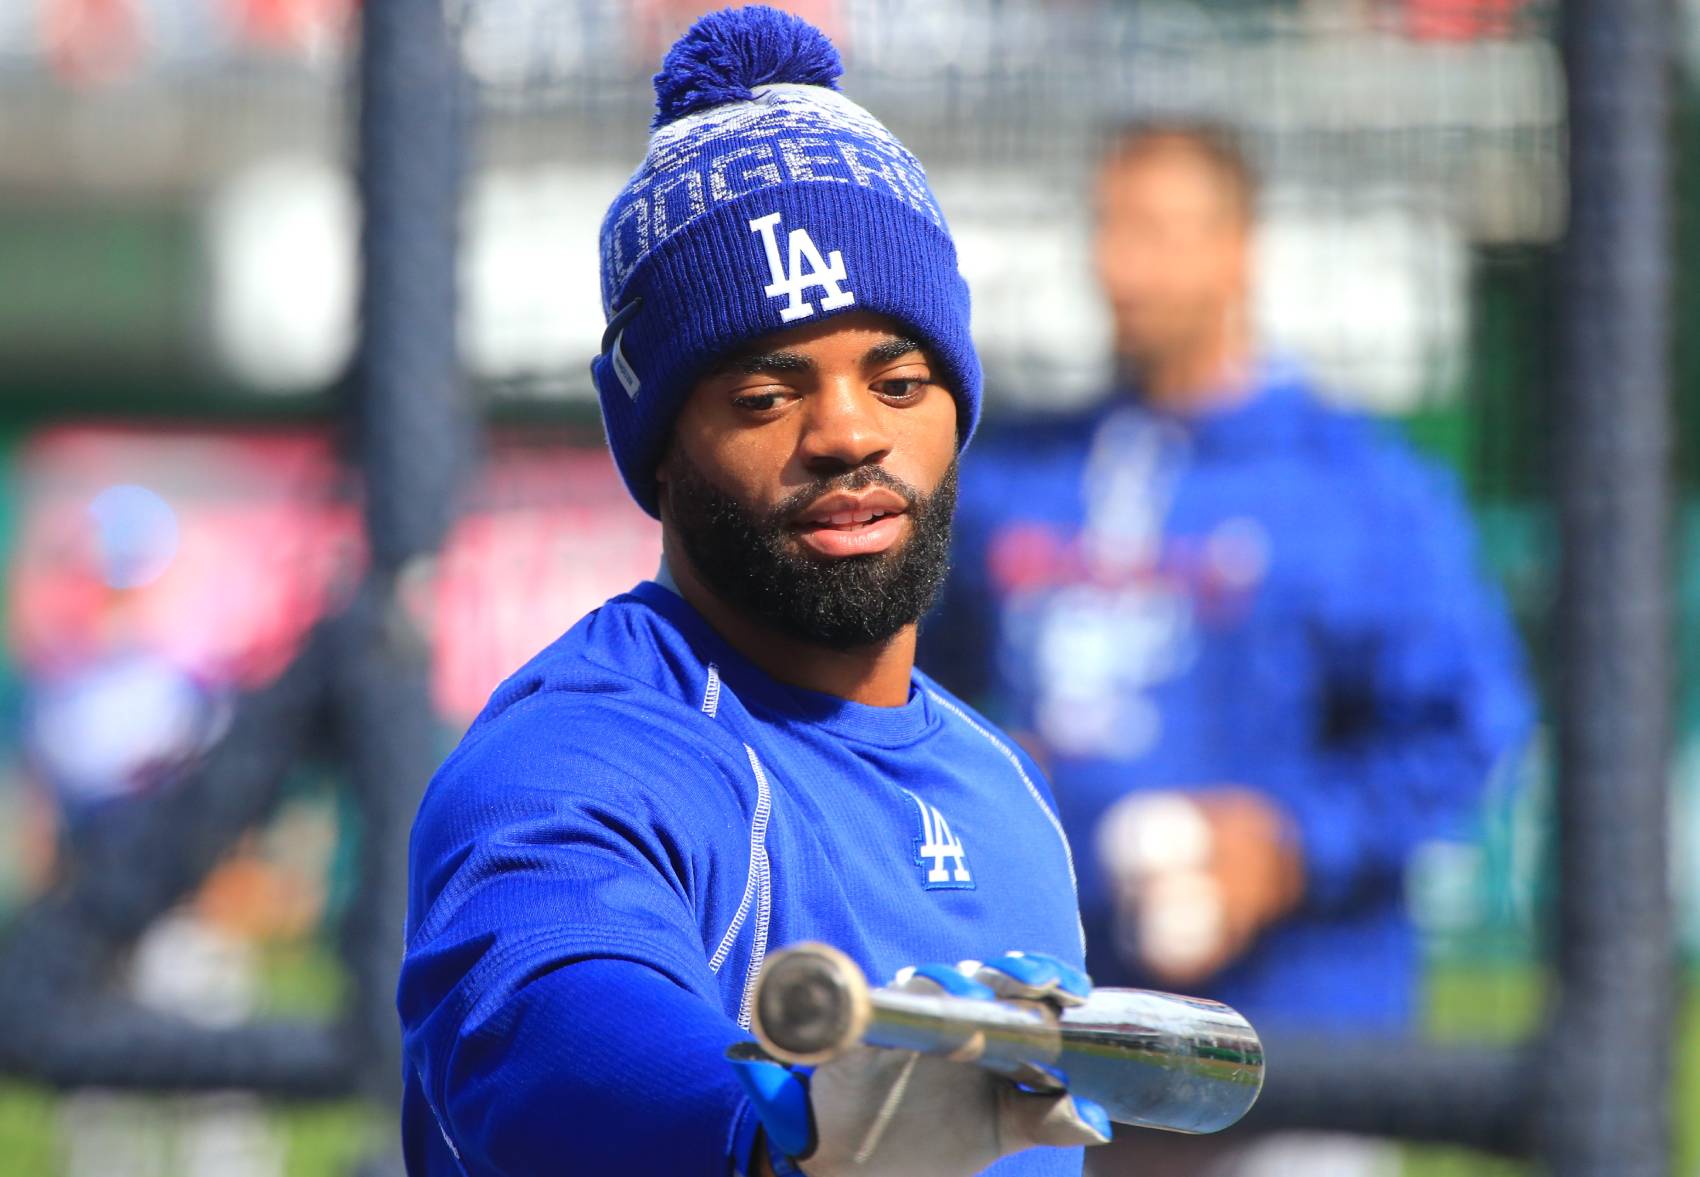 Andrew Toles was a playoff hero for the Los Angeles Dogers a few years ago. Now, his tragic baseball story has gotten far worse.